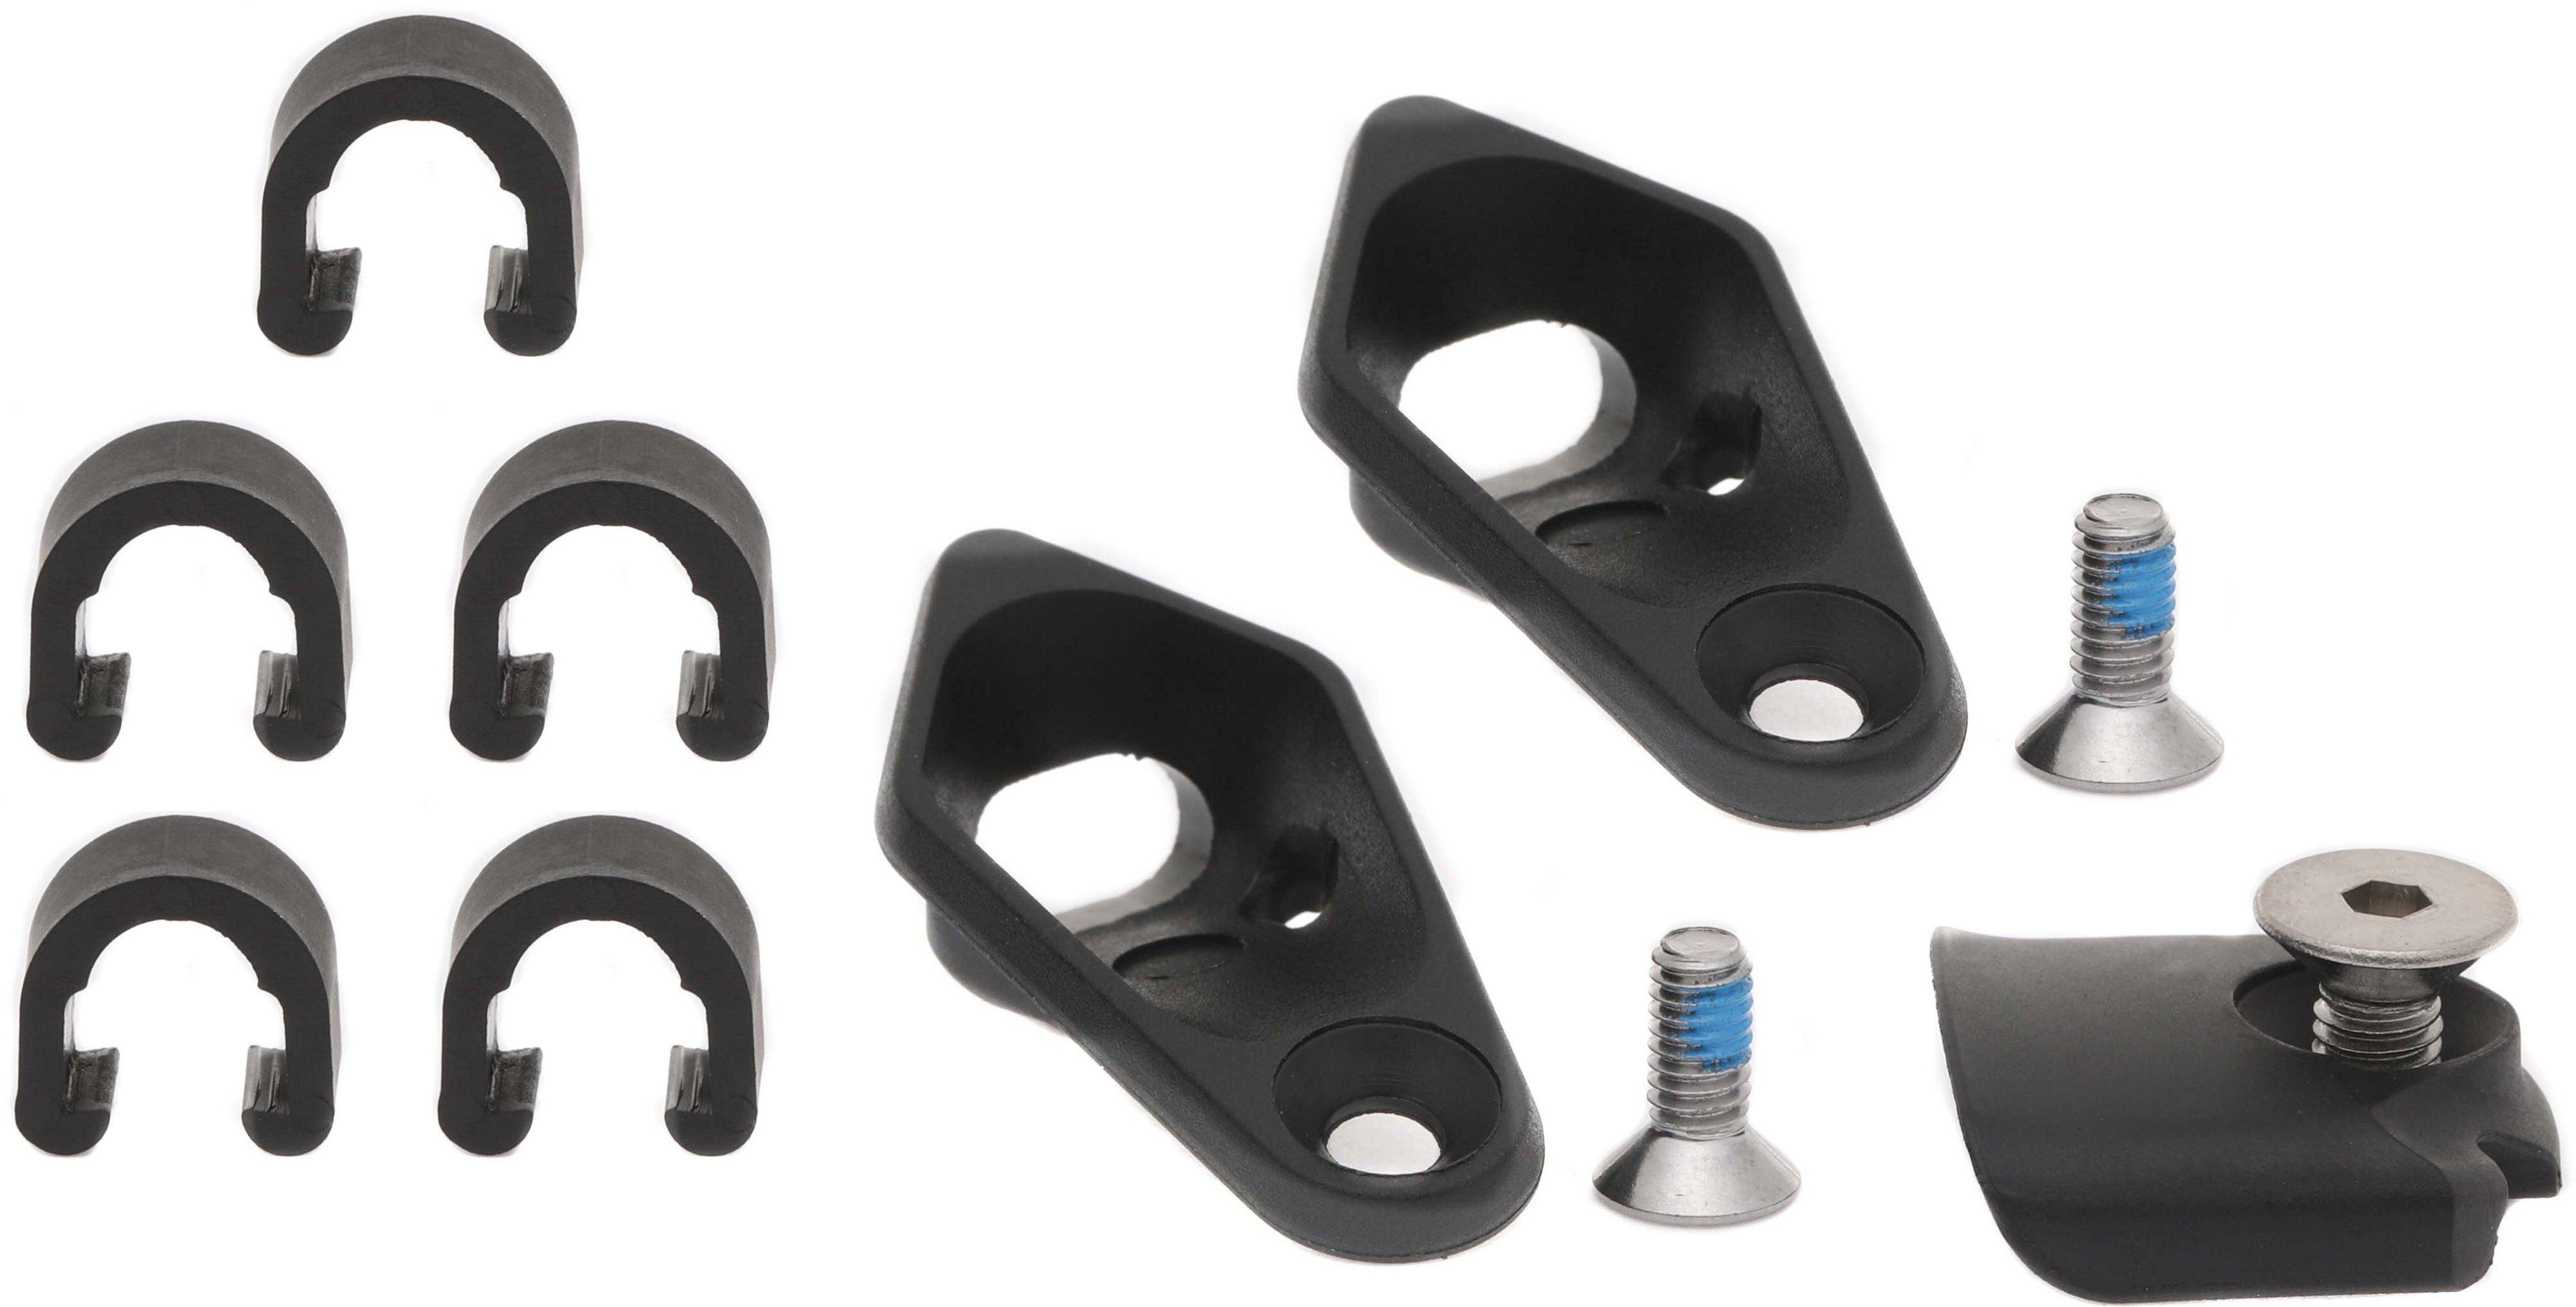 Nukeproof Reactor Alloy Cable Guide Kit 2020  Black